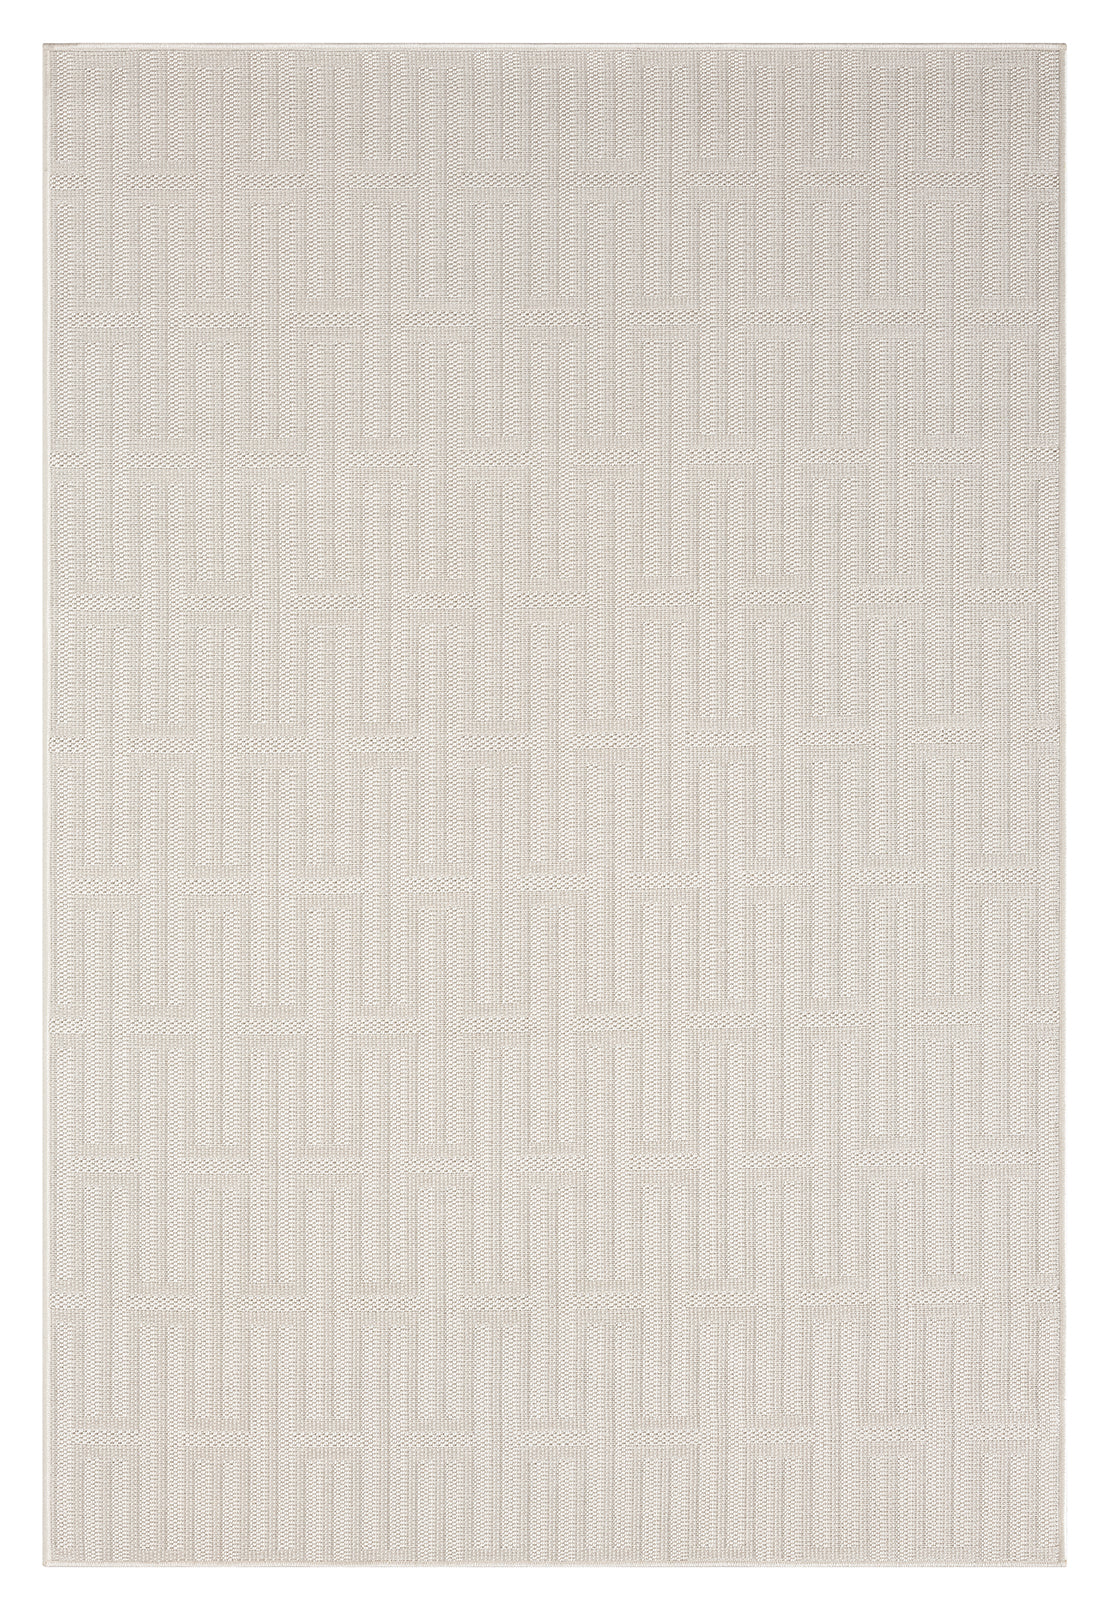 Durable Outdoor Rug | Style #TOV 302 - Crafted from 100% Polypropylene